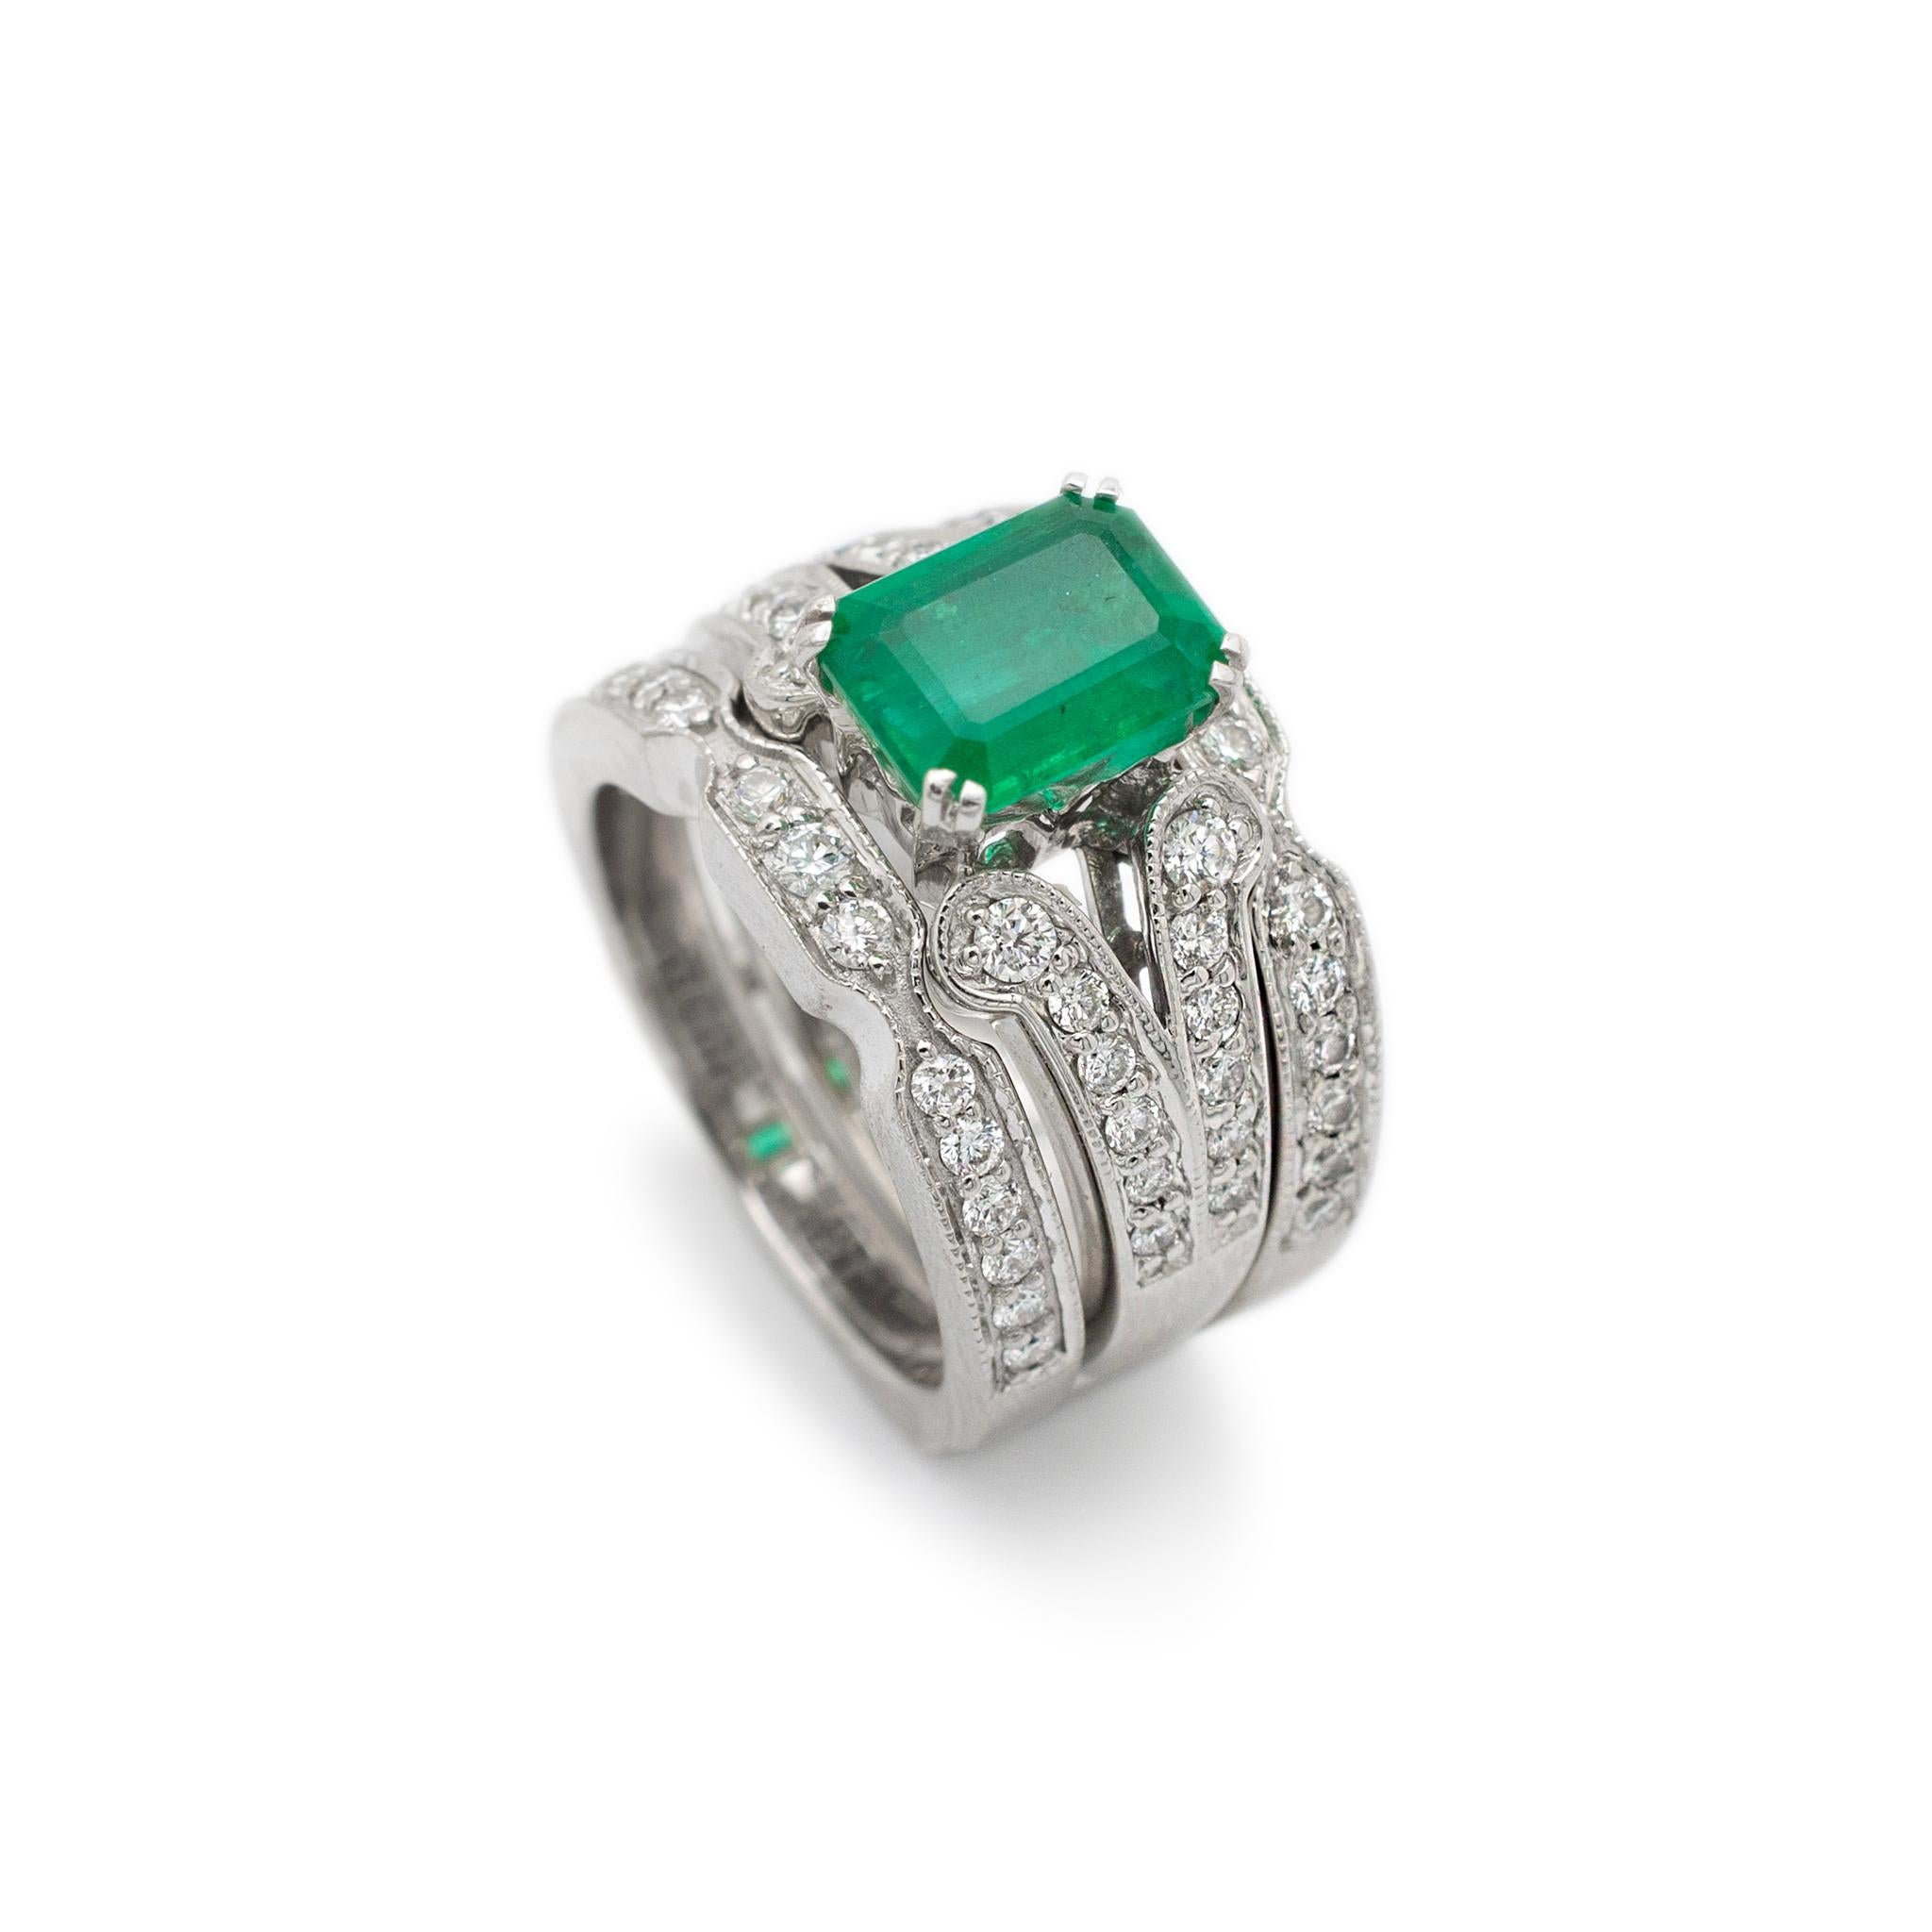 Gender: Ladies

Metal Type: 18K White Gold

Size: 5.5

Width: 2.85 mm

Ring measures approximately in width: 2.85 mm

Jacket measures in width: 8.50 mm

Weight: 15.69 grams

18K White Gold Diamond and Emerald Cocktail Ring with a soft-square shank.